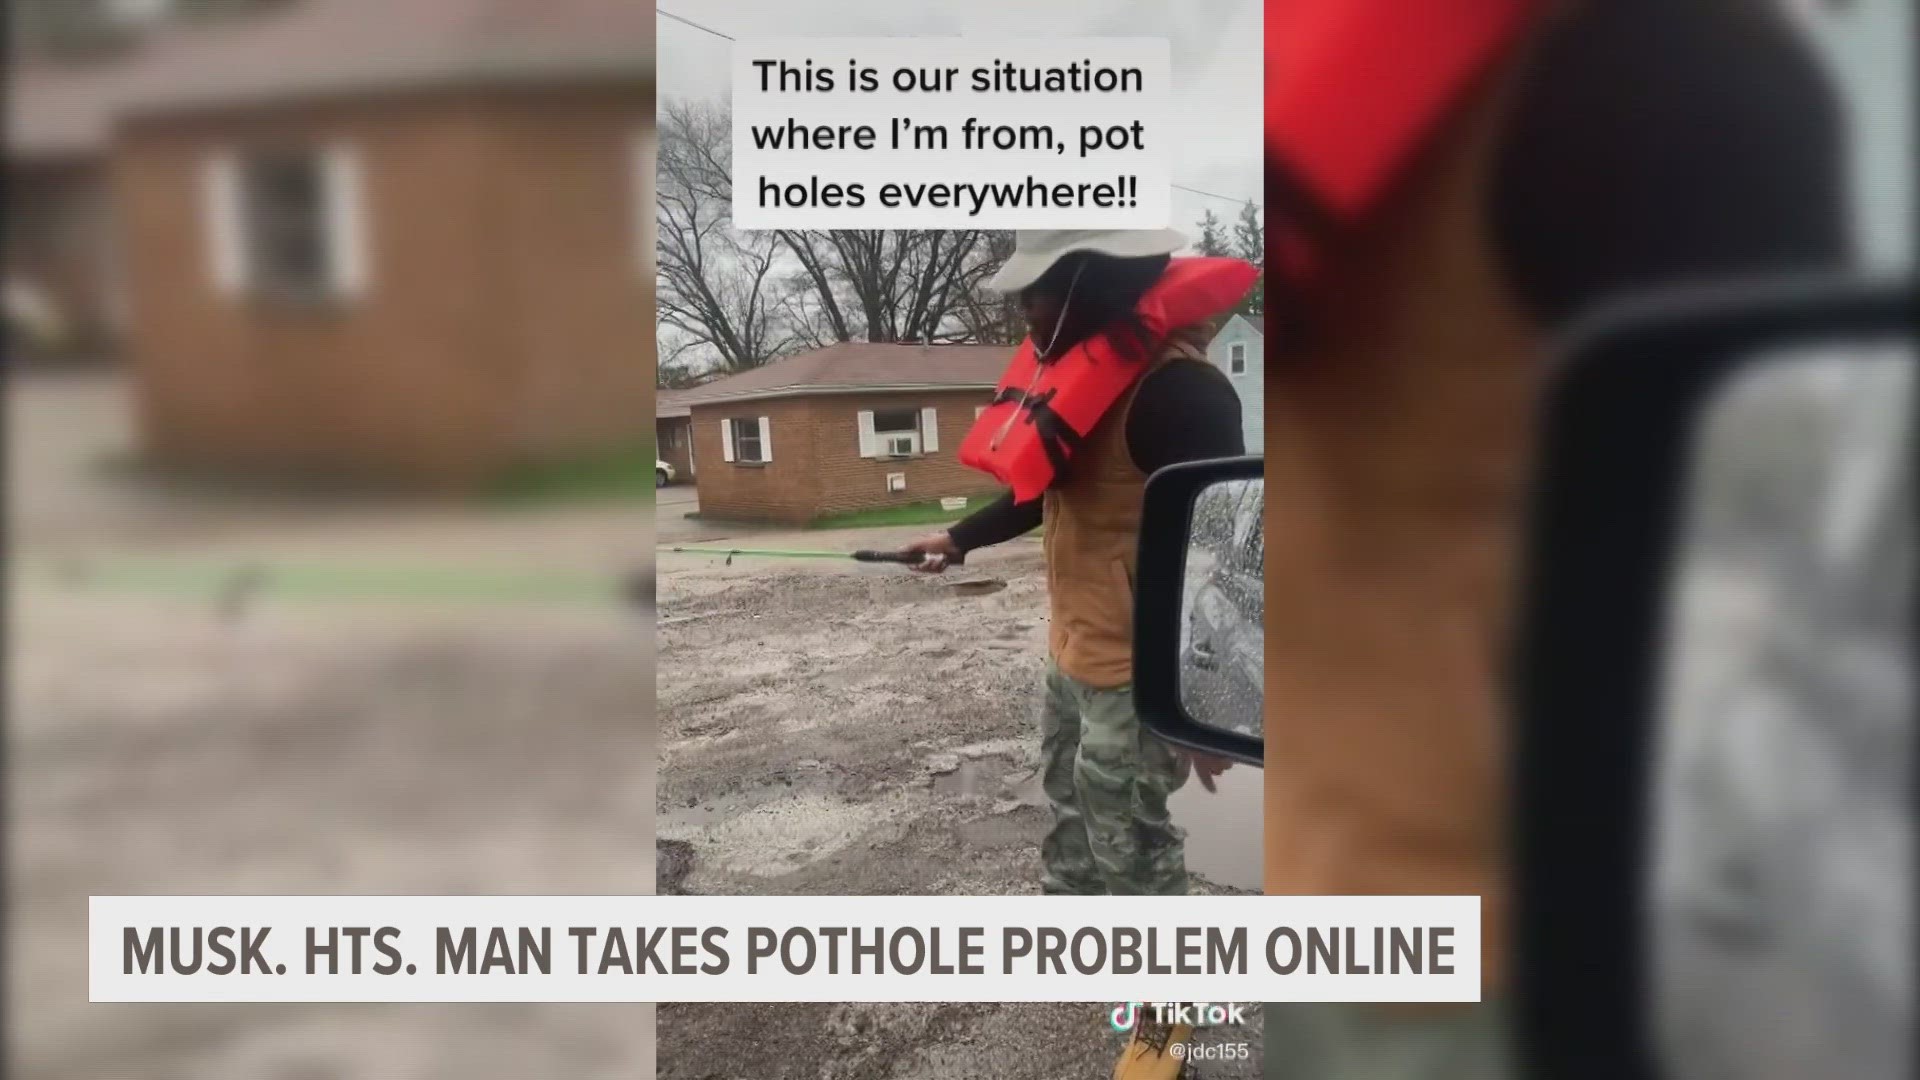 James Coffee says he'll be fishing in the potholes around Muskegon Heights until they get fixed.